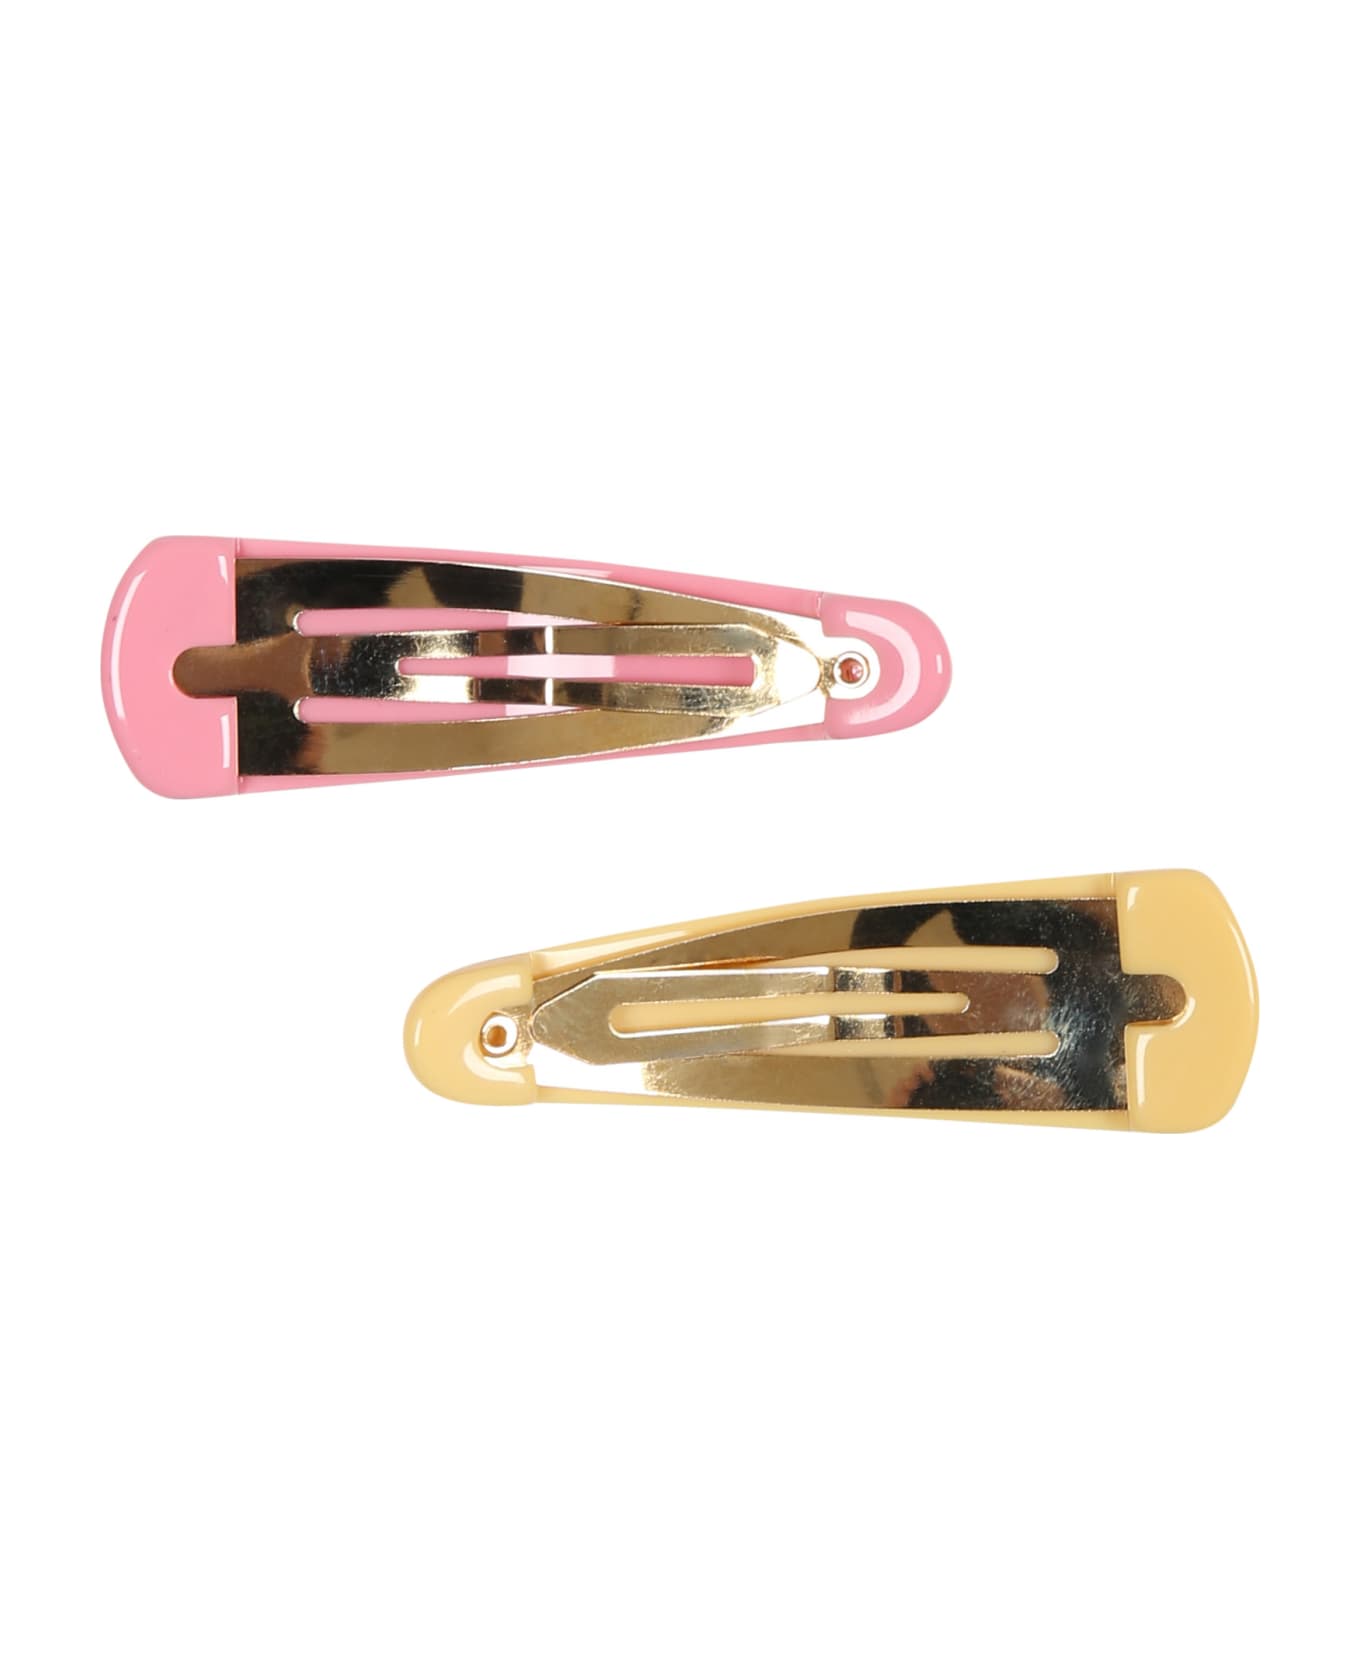 Gucci Pair Of Multicolor Hair Clips For Girl - Multicolor